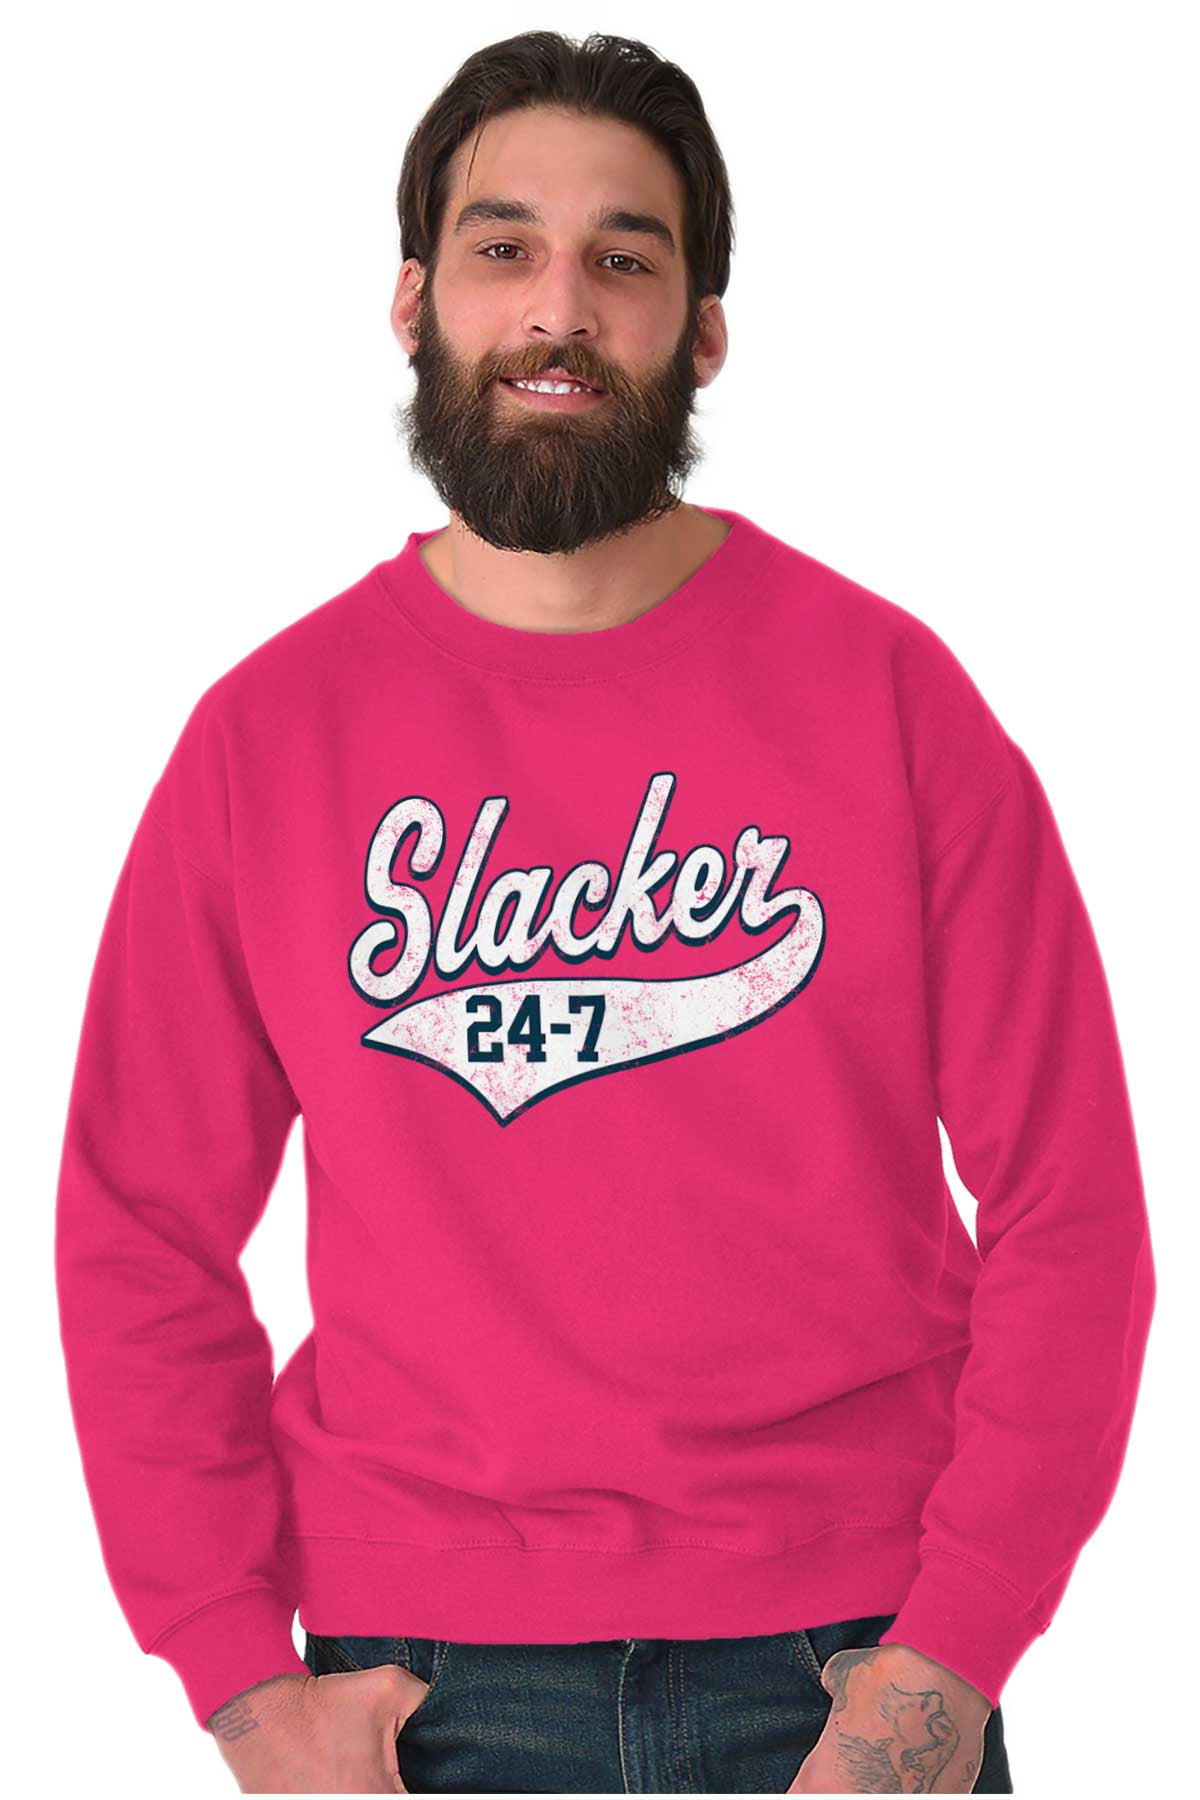 Slacker Funny Lazy People Gym Workout Gift Womens or Mens Crewneck